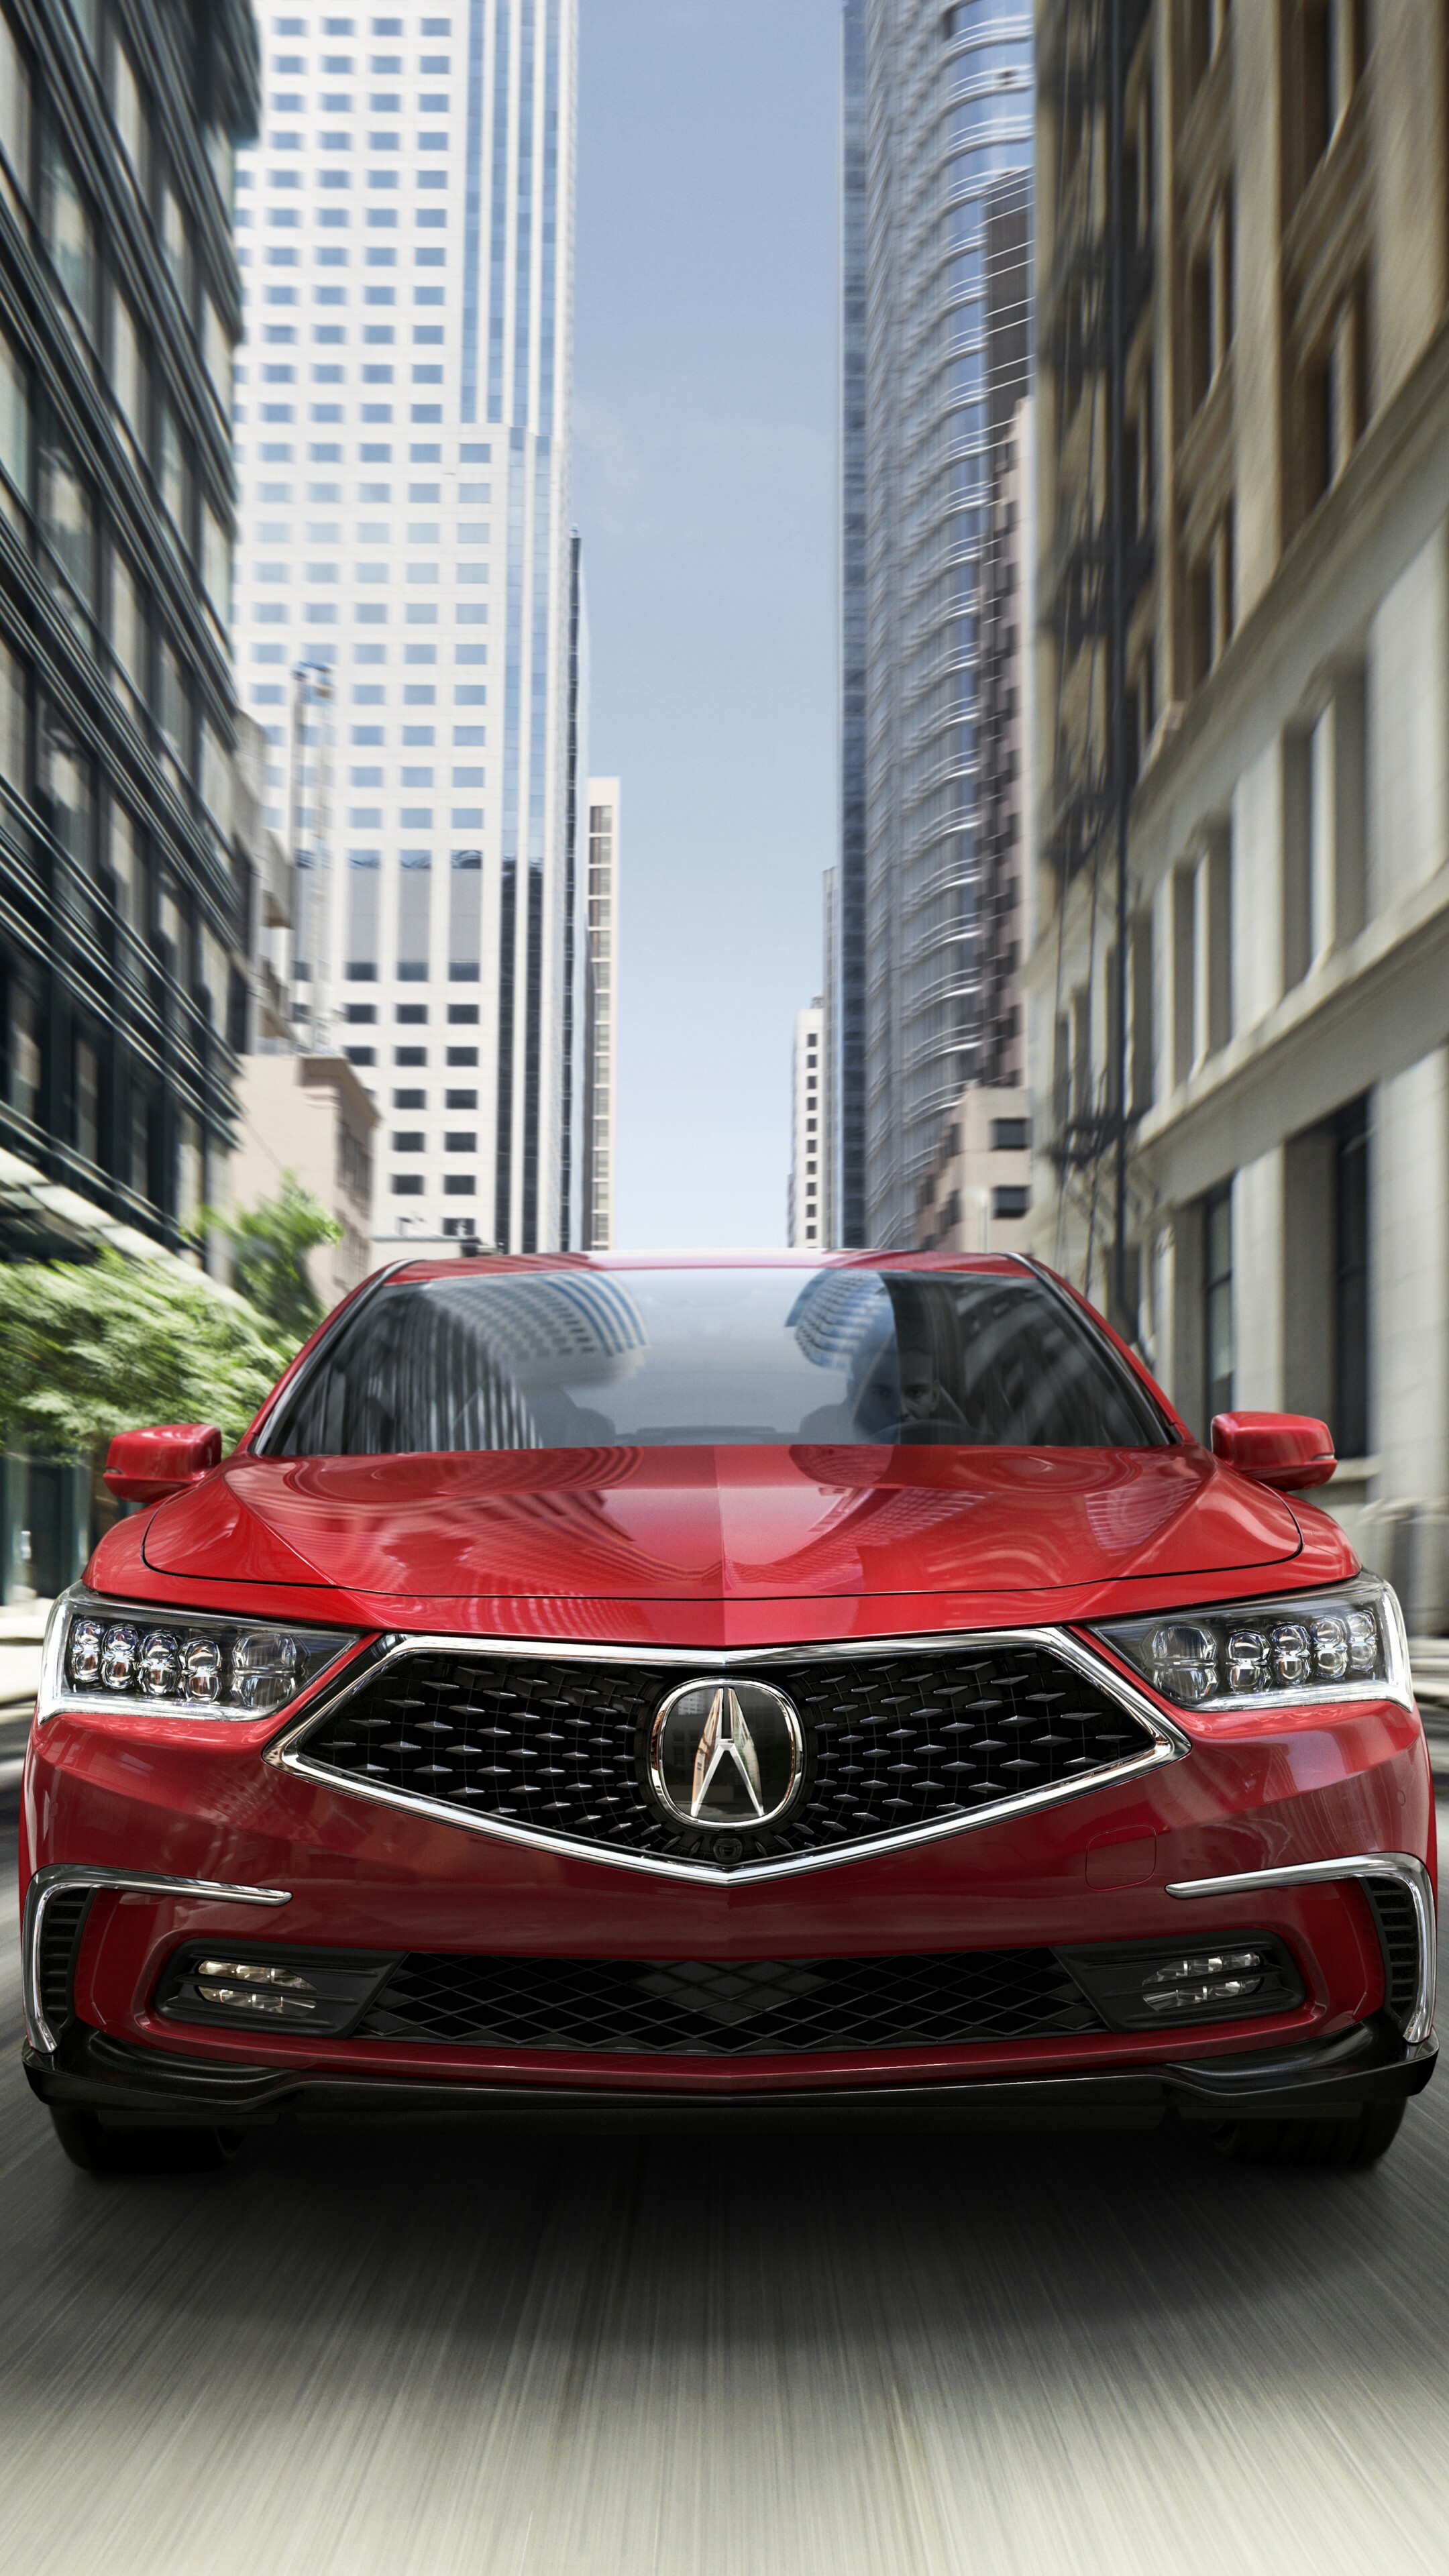 Acura: RLX, A mid-size flagship luxury car manufactured by Honda. 2160x3840 4K Background.